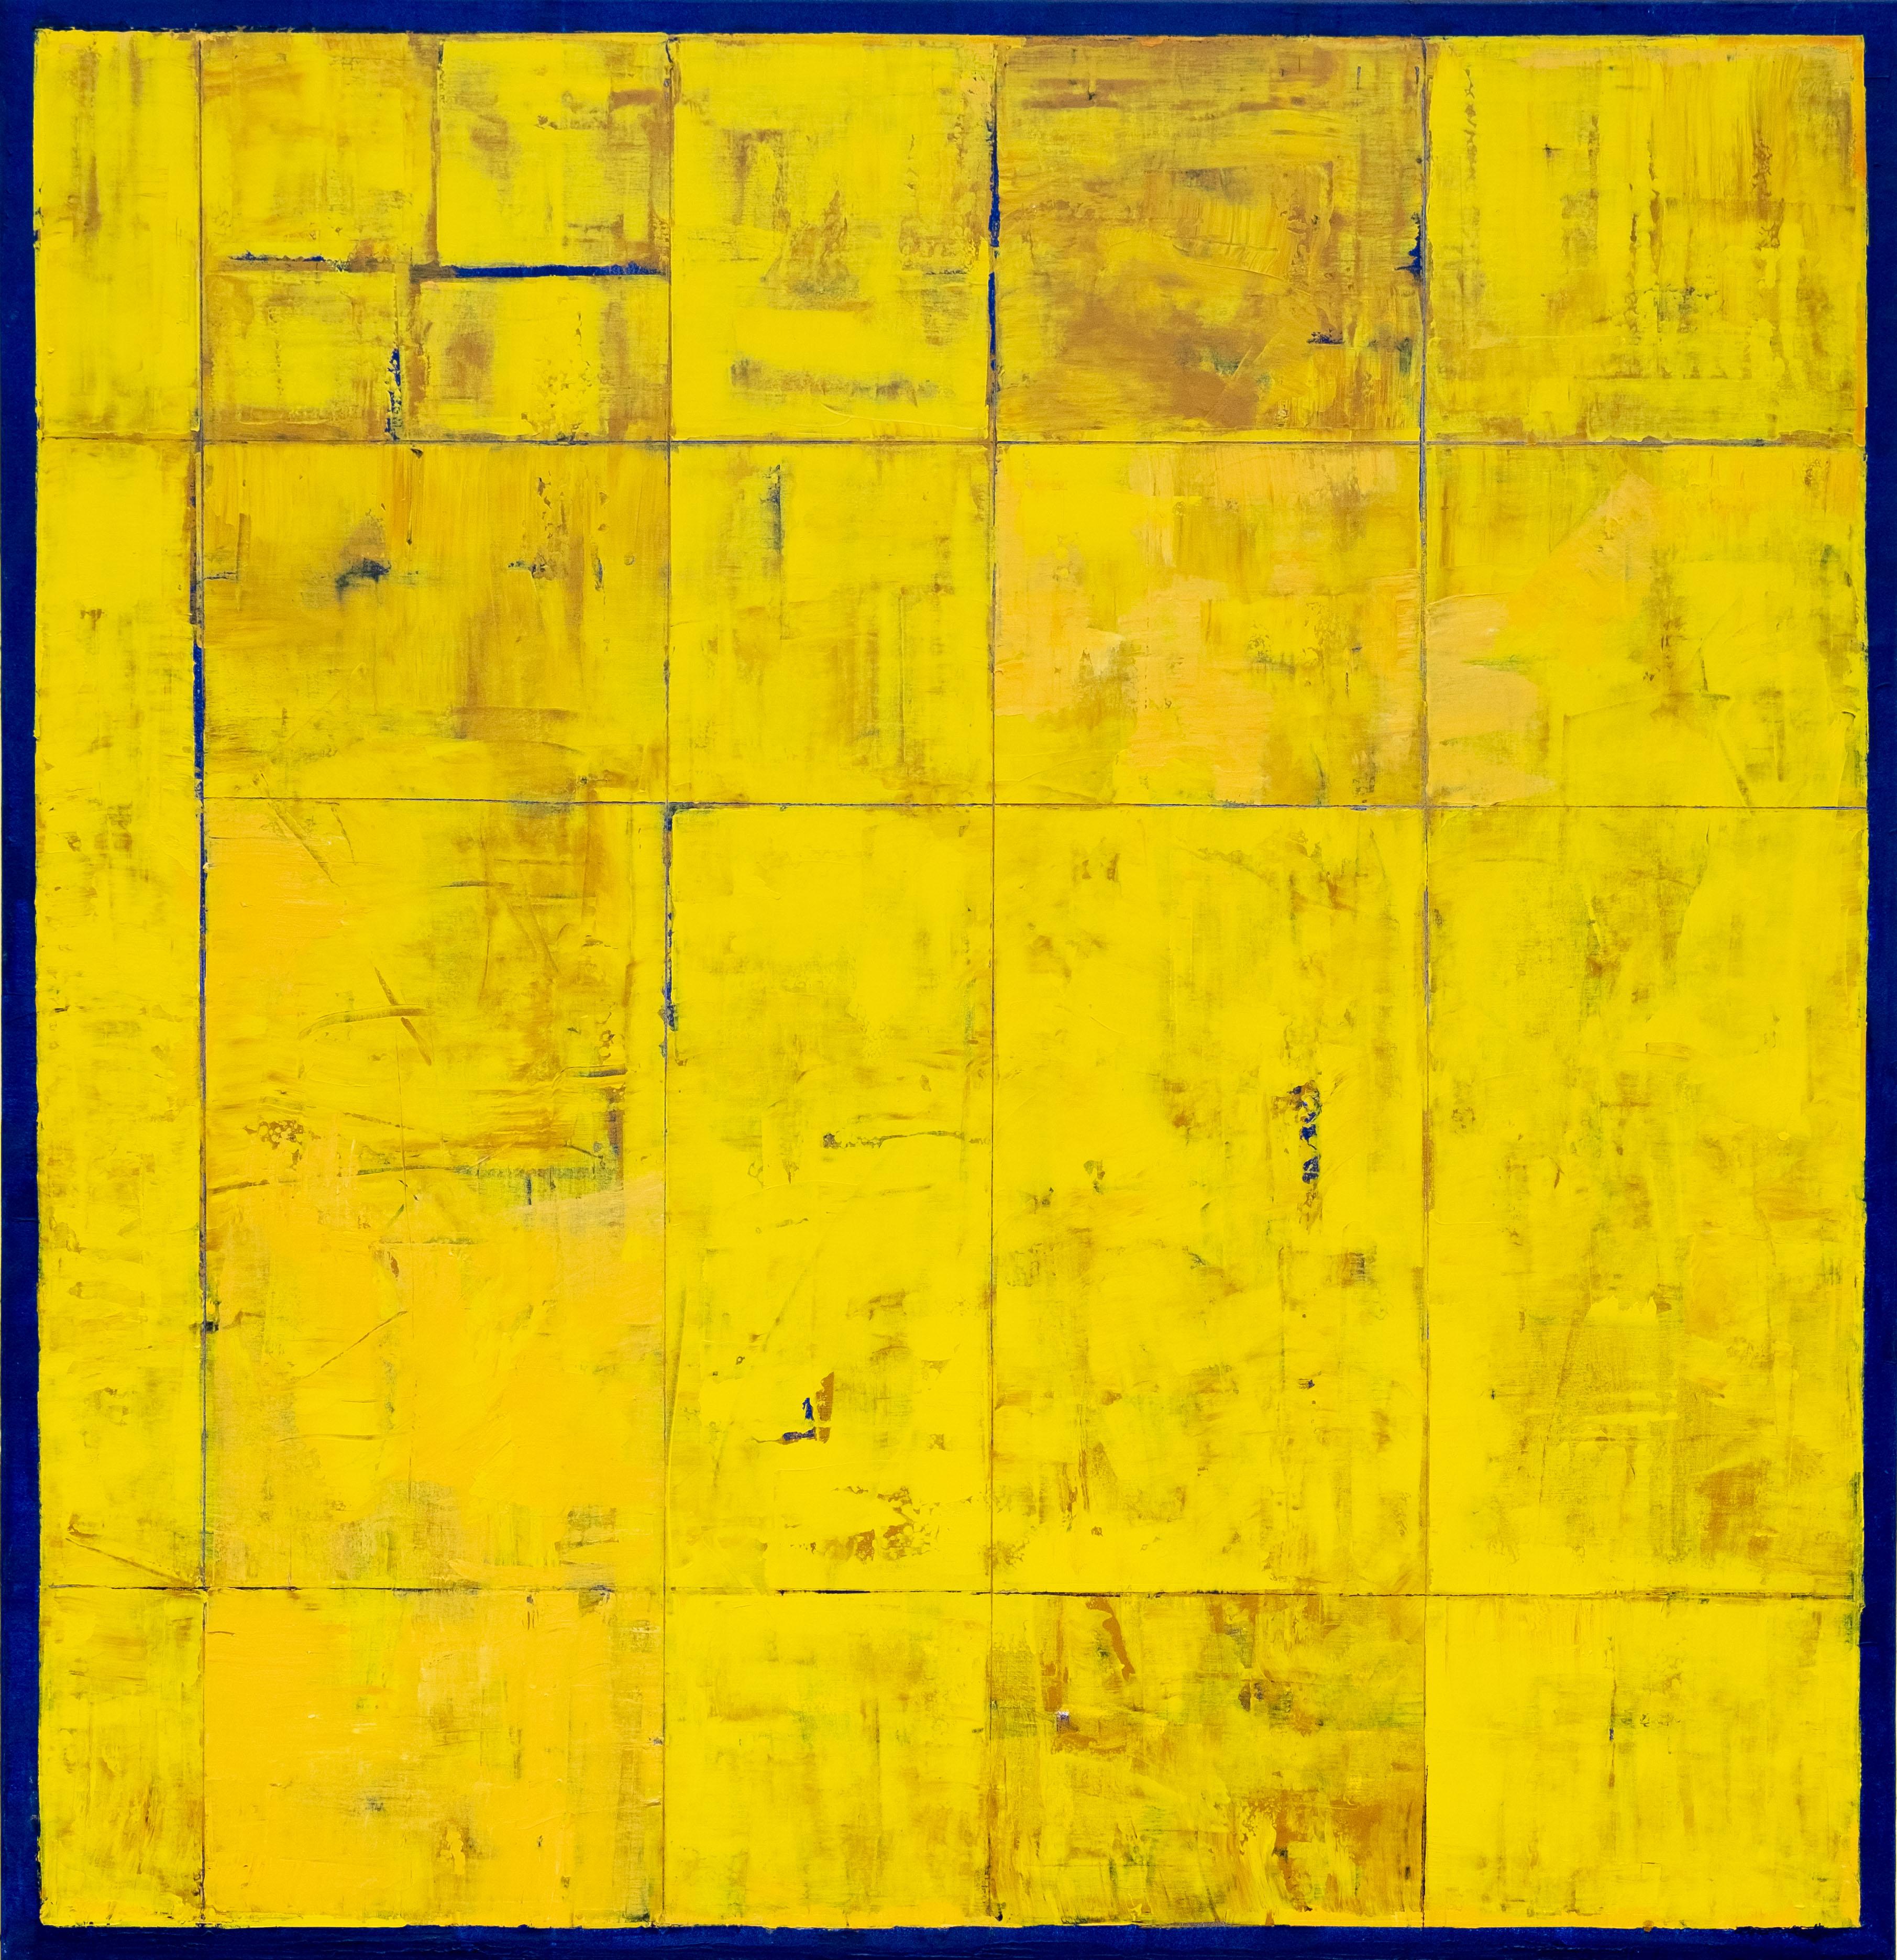 David Sorensen Abstract Painting - Amida - large, bright, colorful, yellow, abstract grid, modernist, oil on canvas